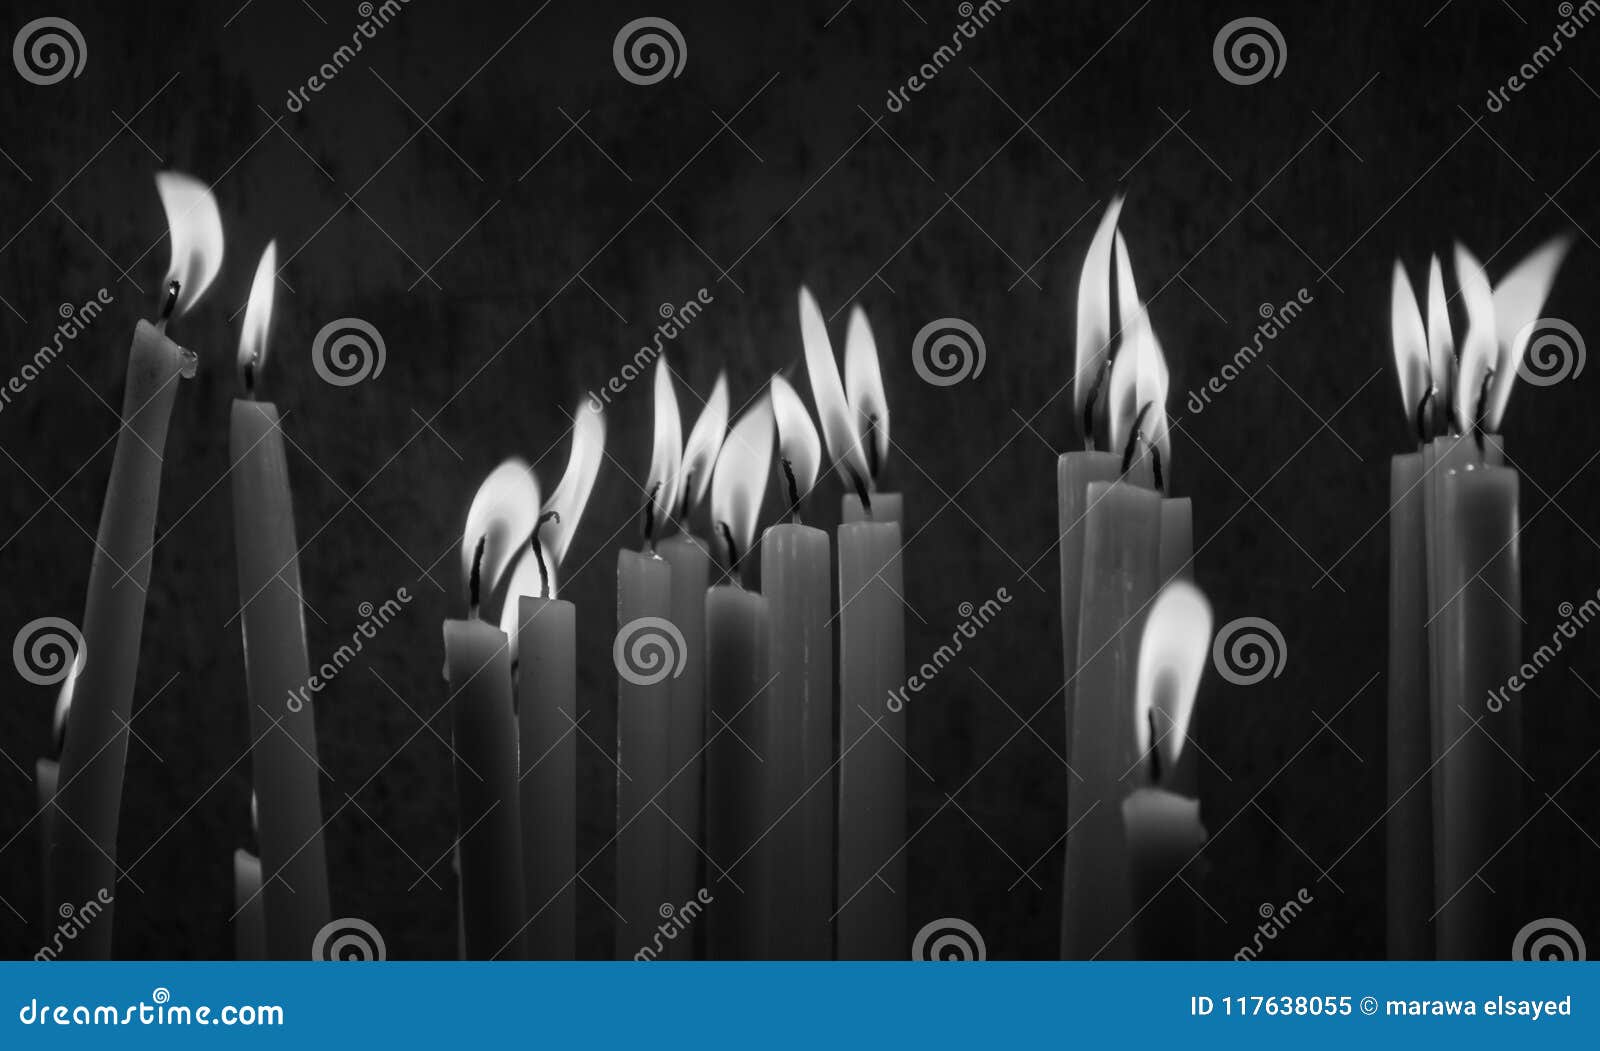 Candles stock image. Image of tall, backgrounds, egypt - 117638055